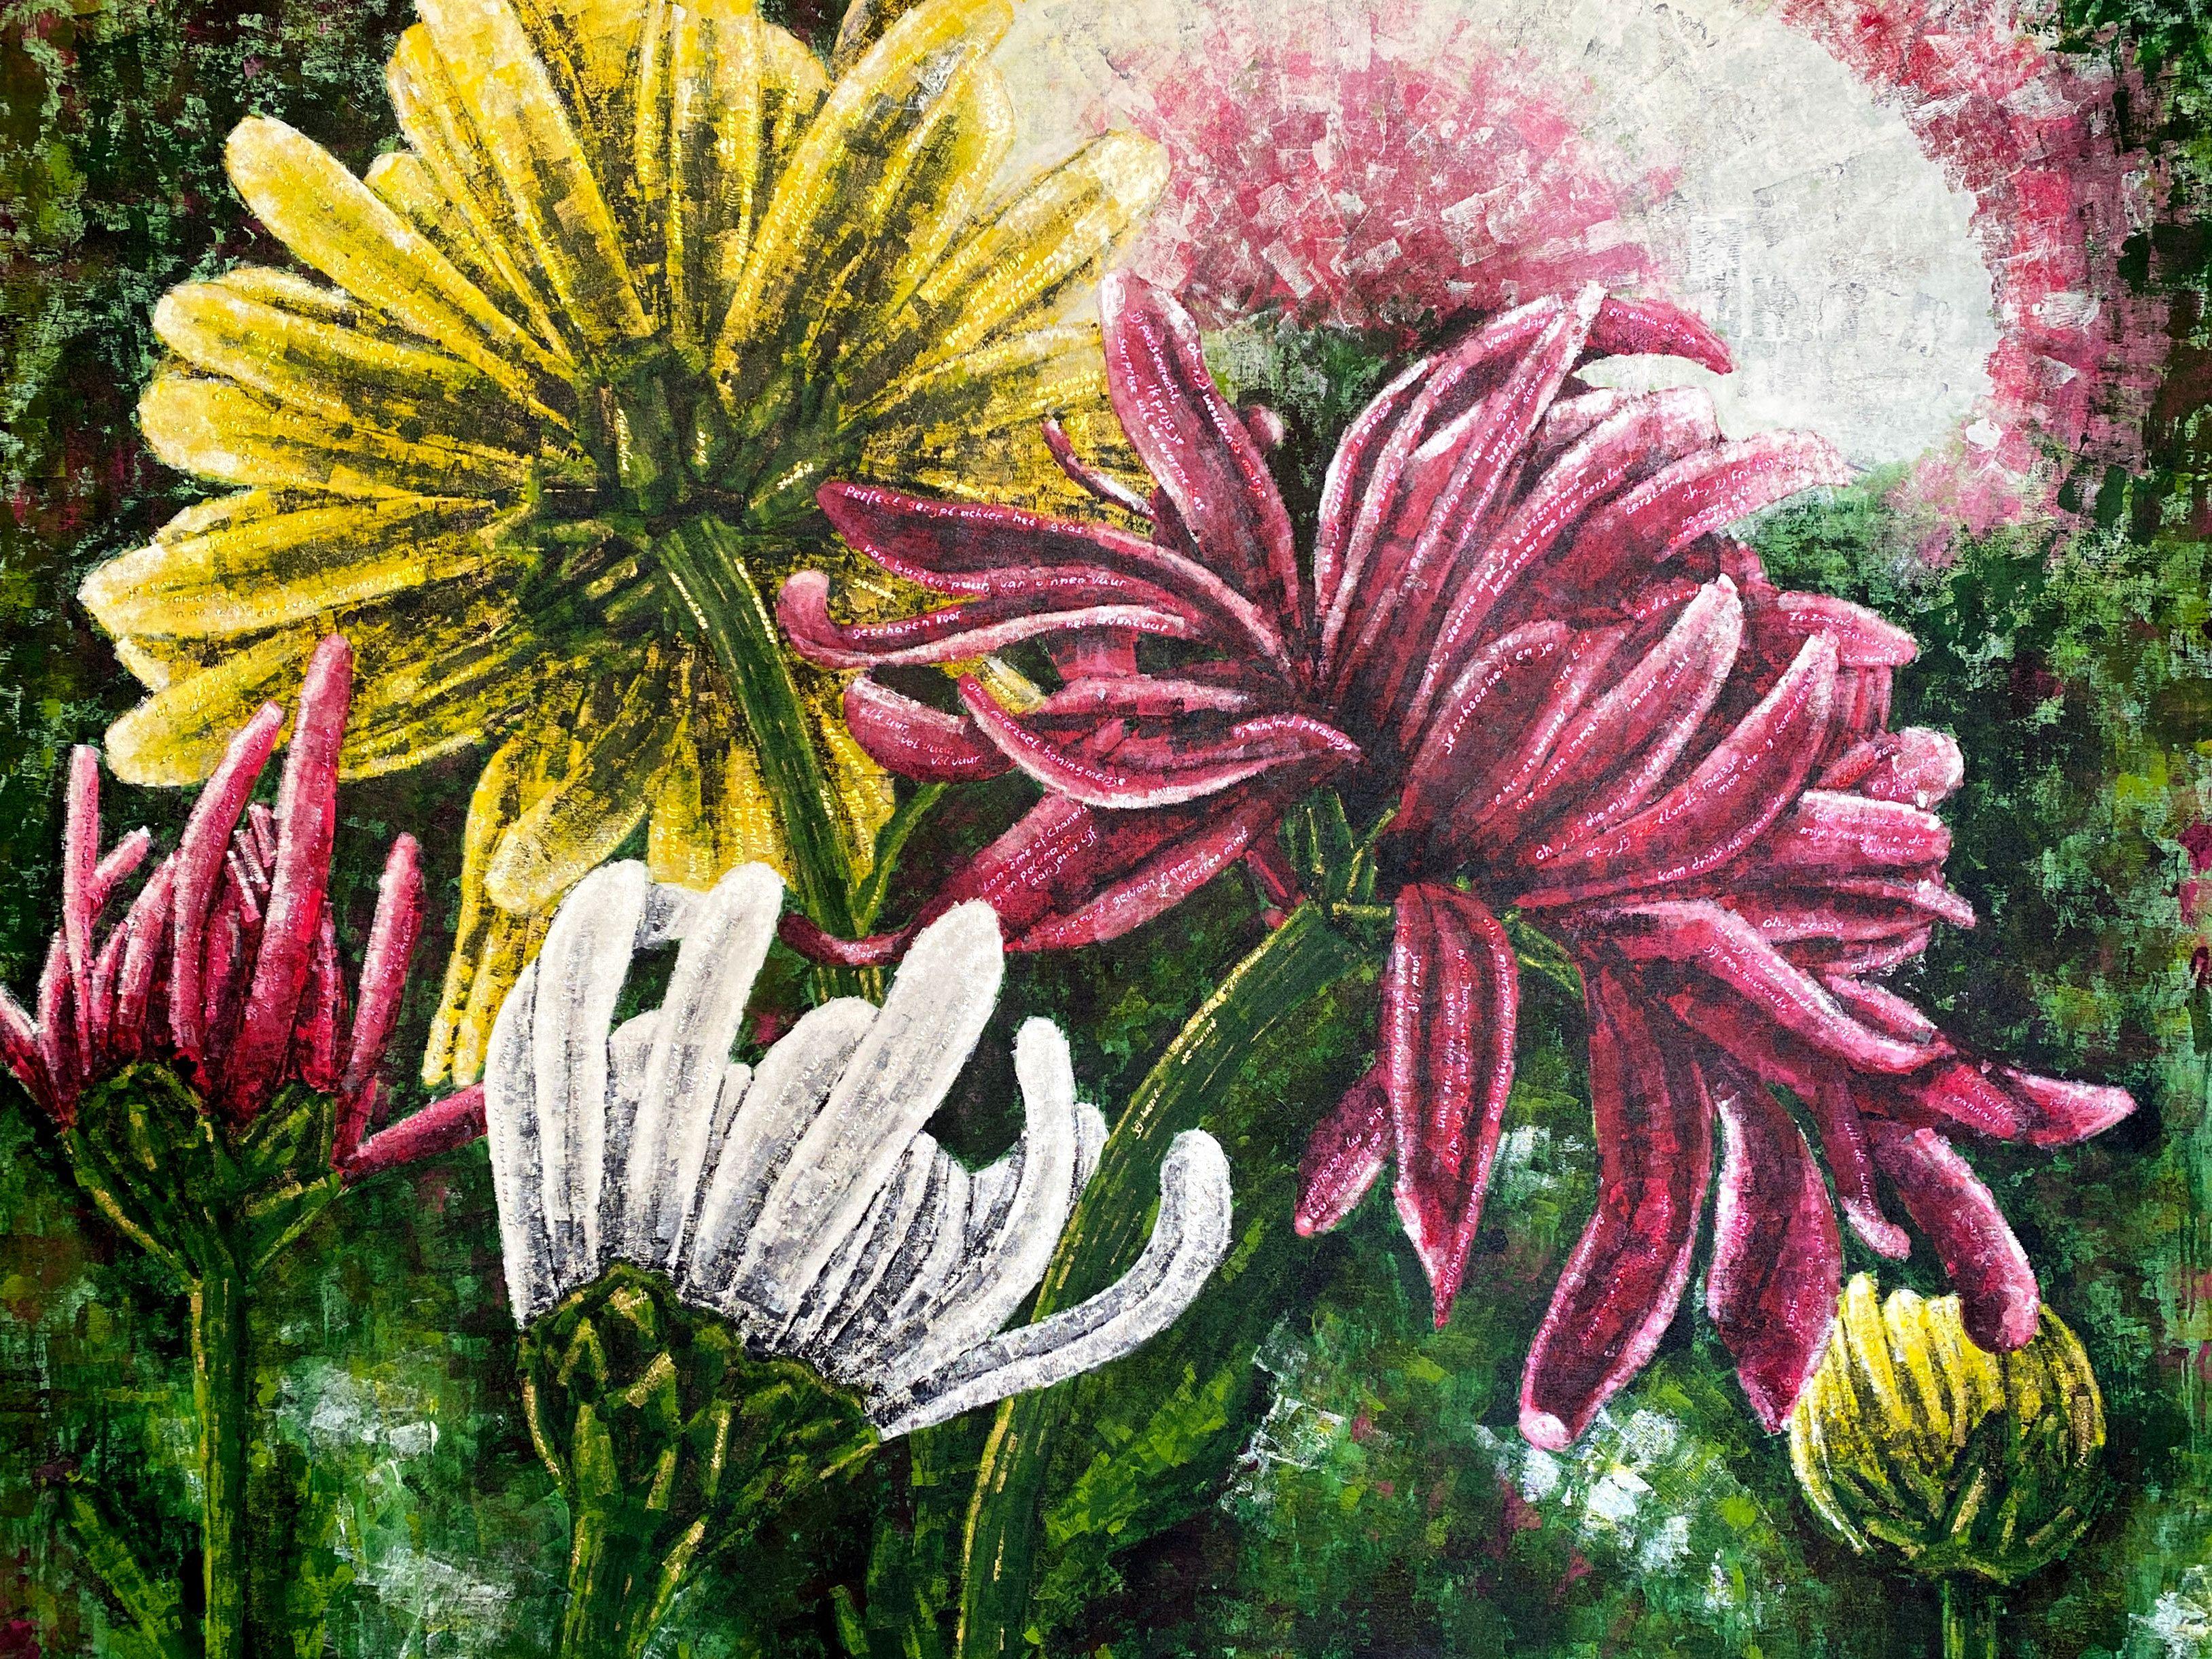 Elise Eekhout used to work in greenhouses with chrysanthemums for years before she went to art school. She collaborated with a poet (Joop Alleblas) for a series inspired by those colorful flowers.    Since the chrysanthemum blooms in the fall, the